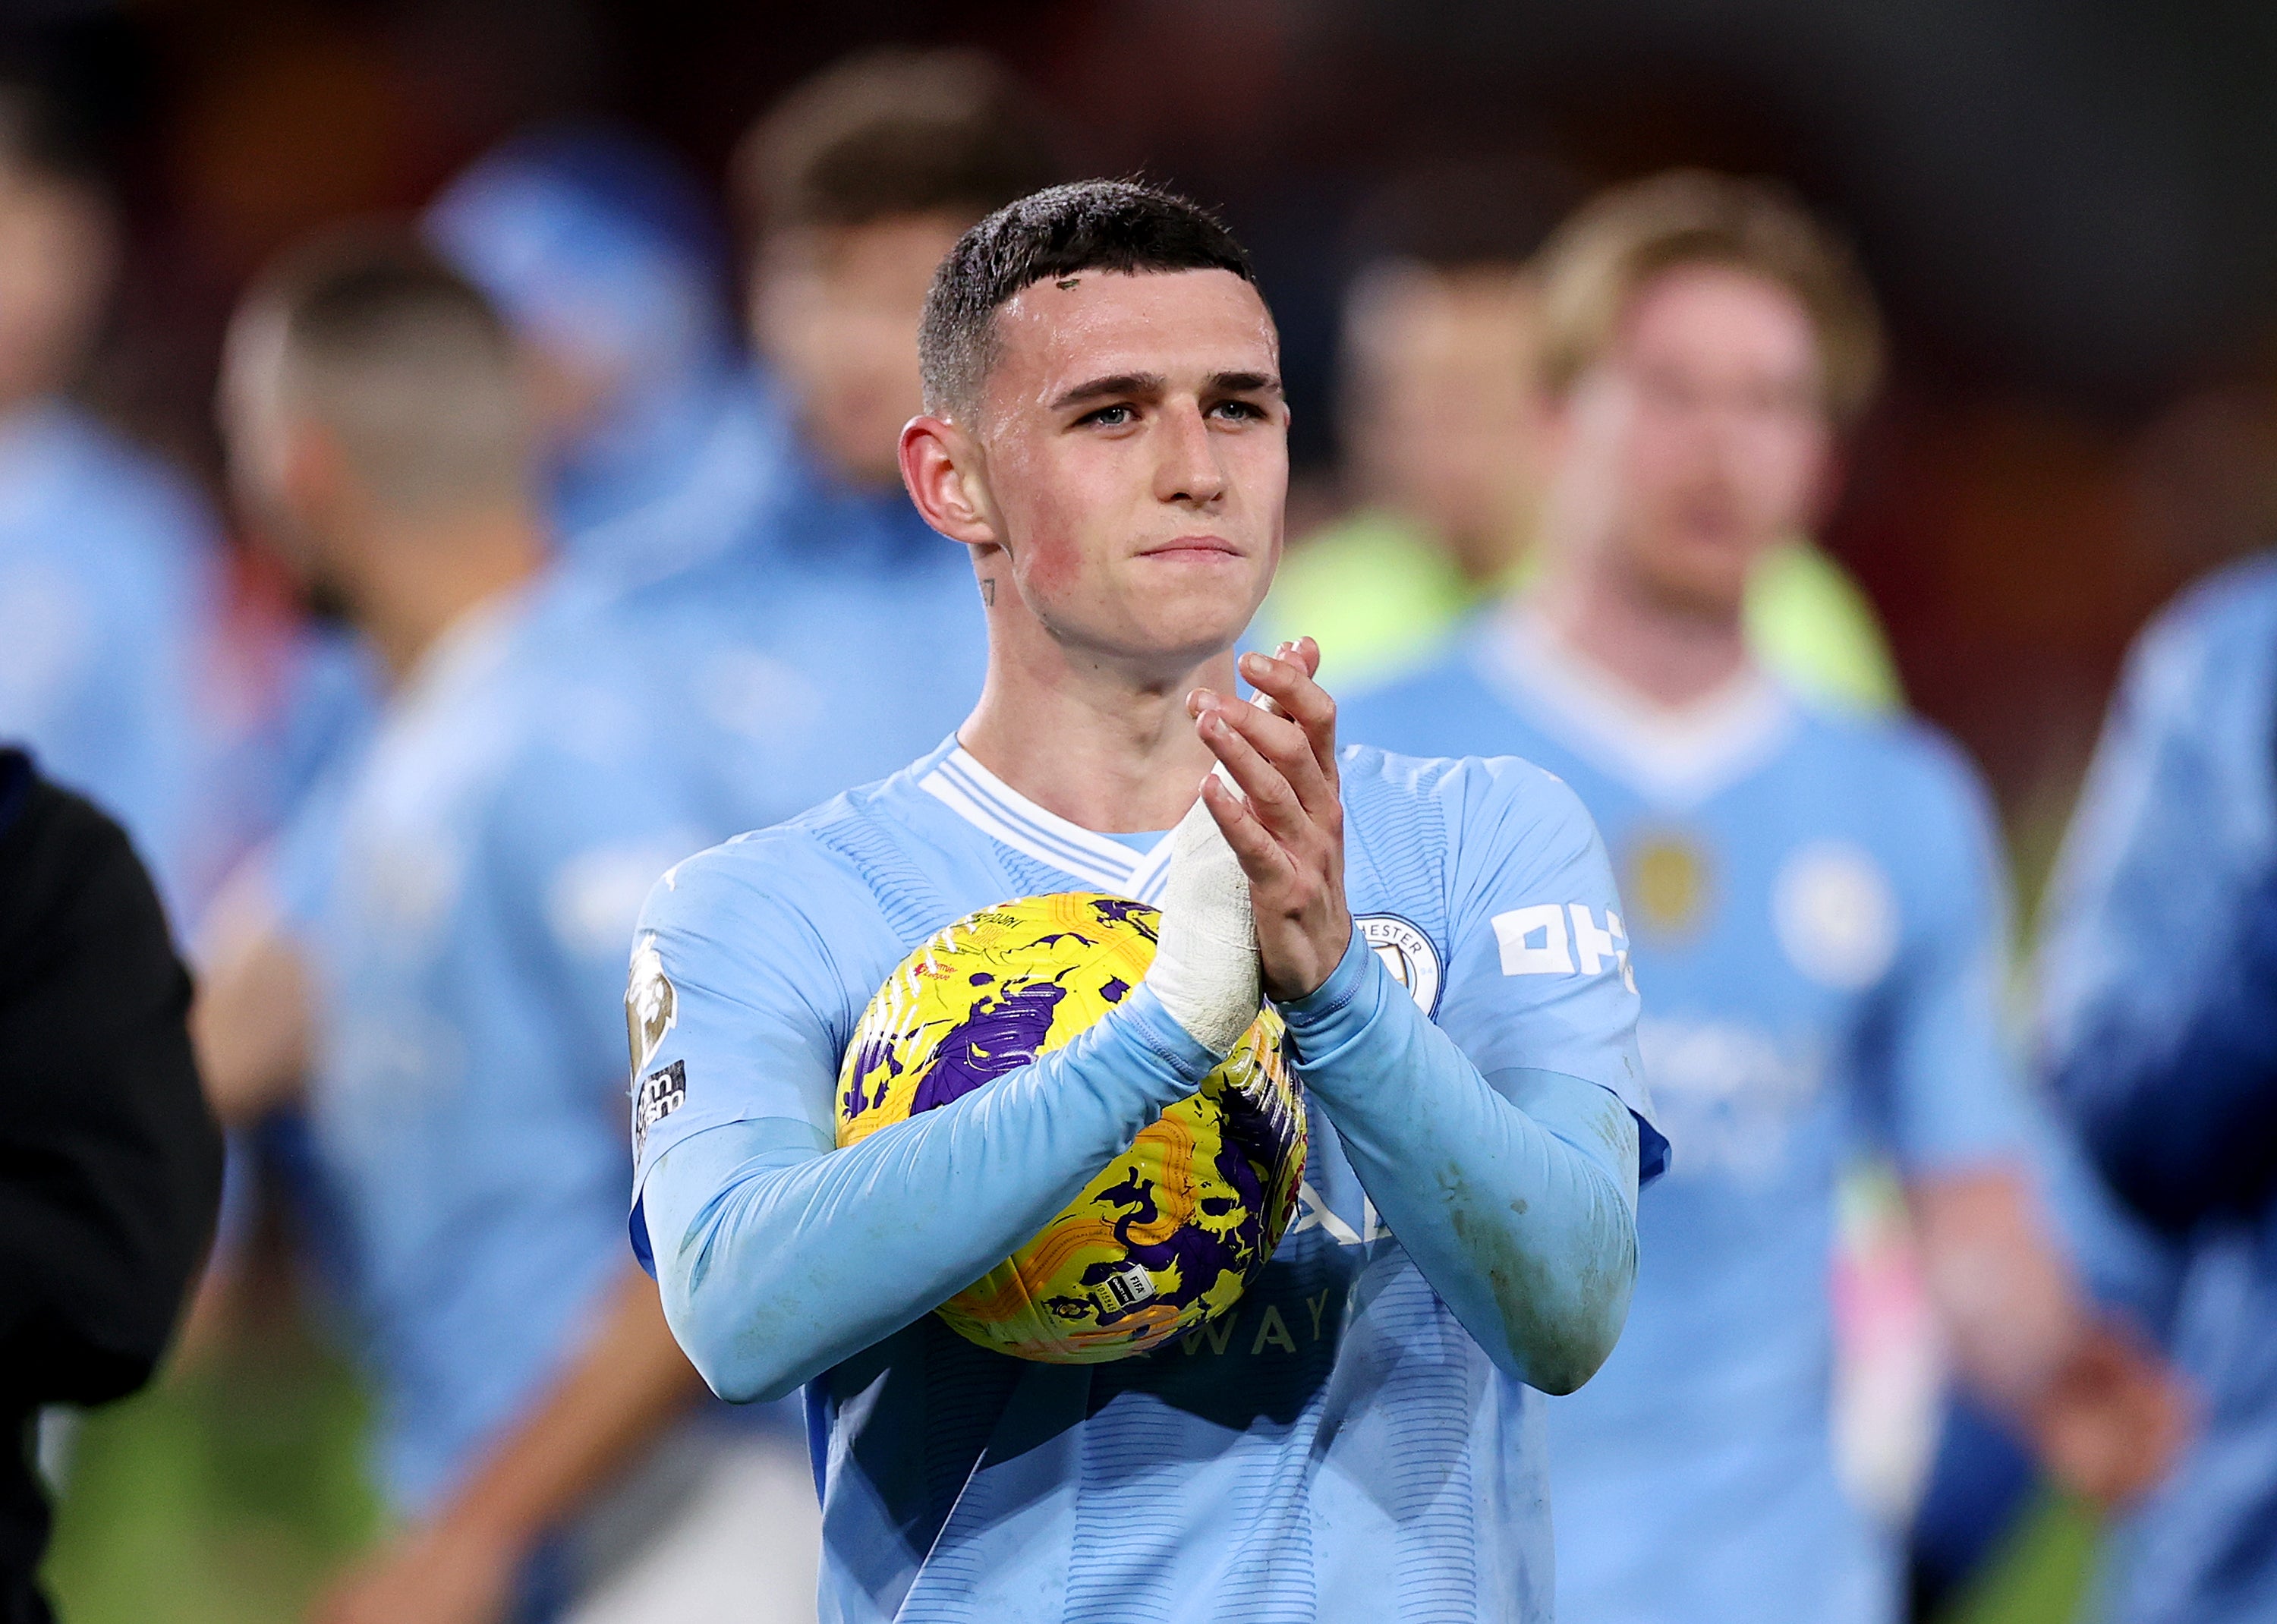 Foden’s hat-trick took City to within two points of leaders Liverpool